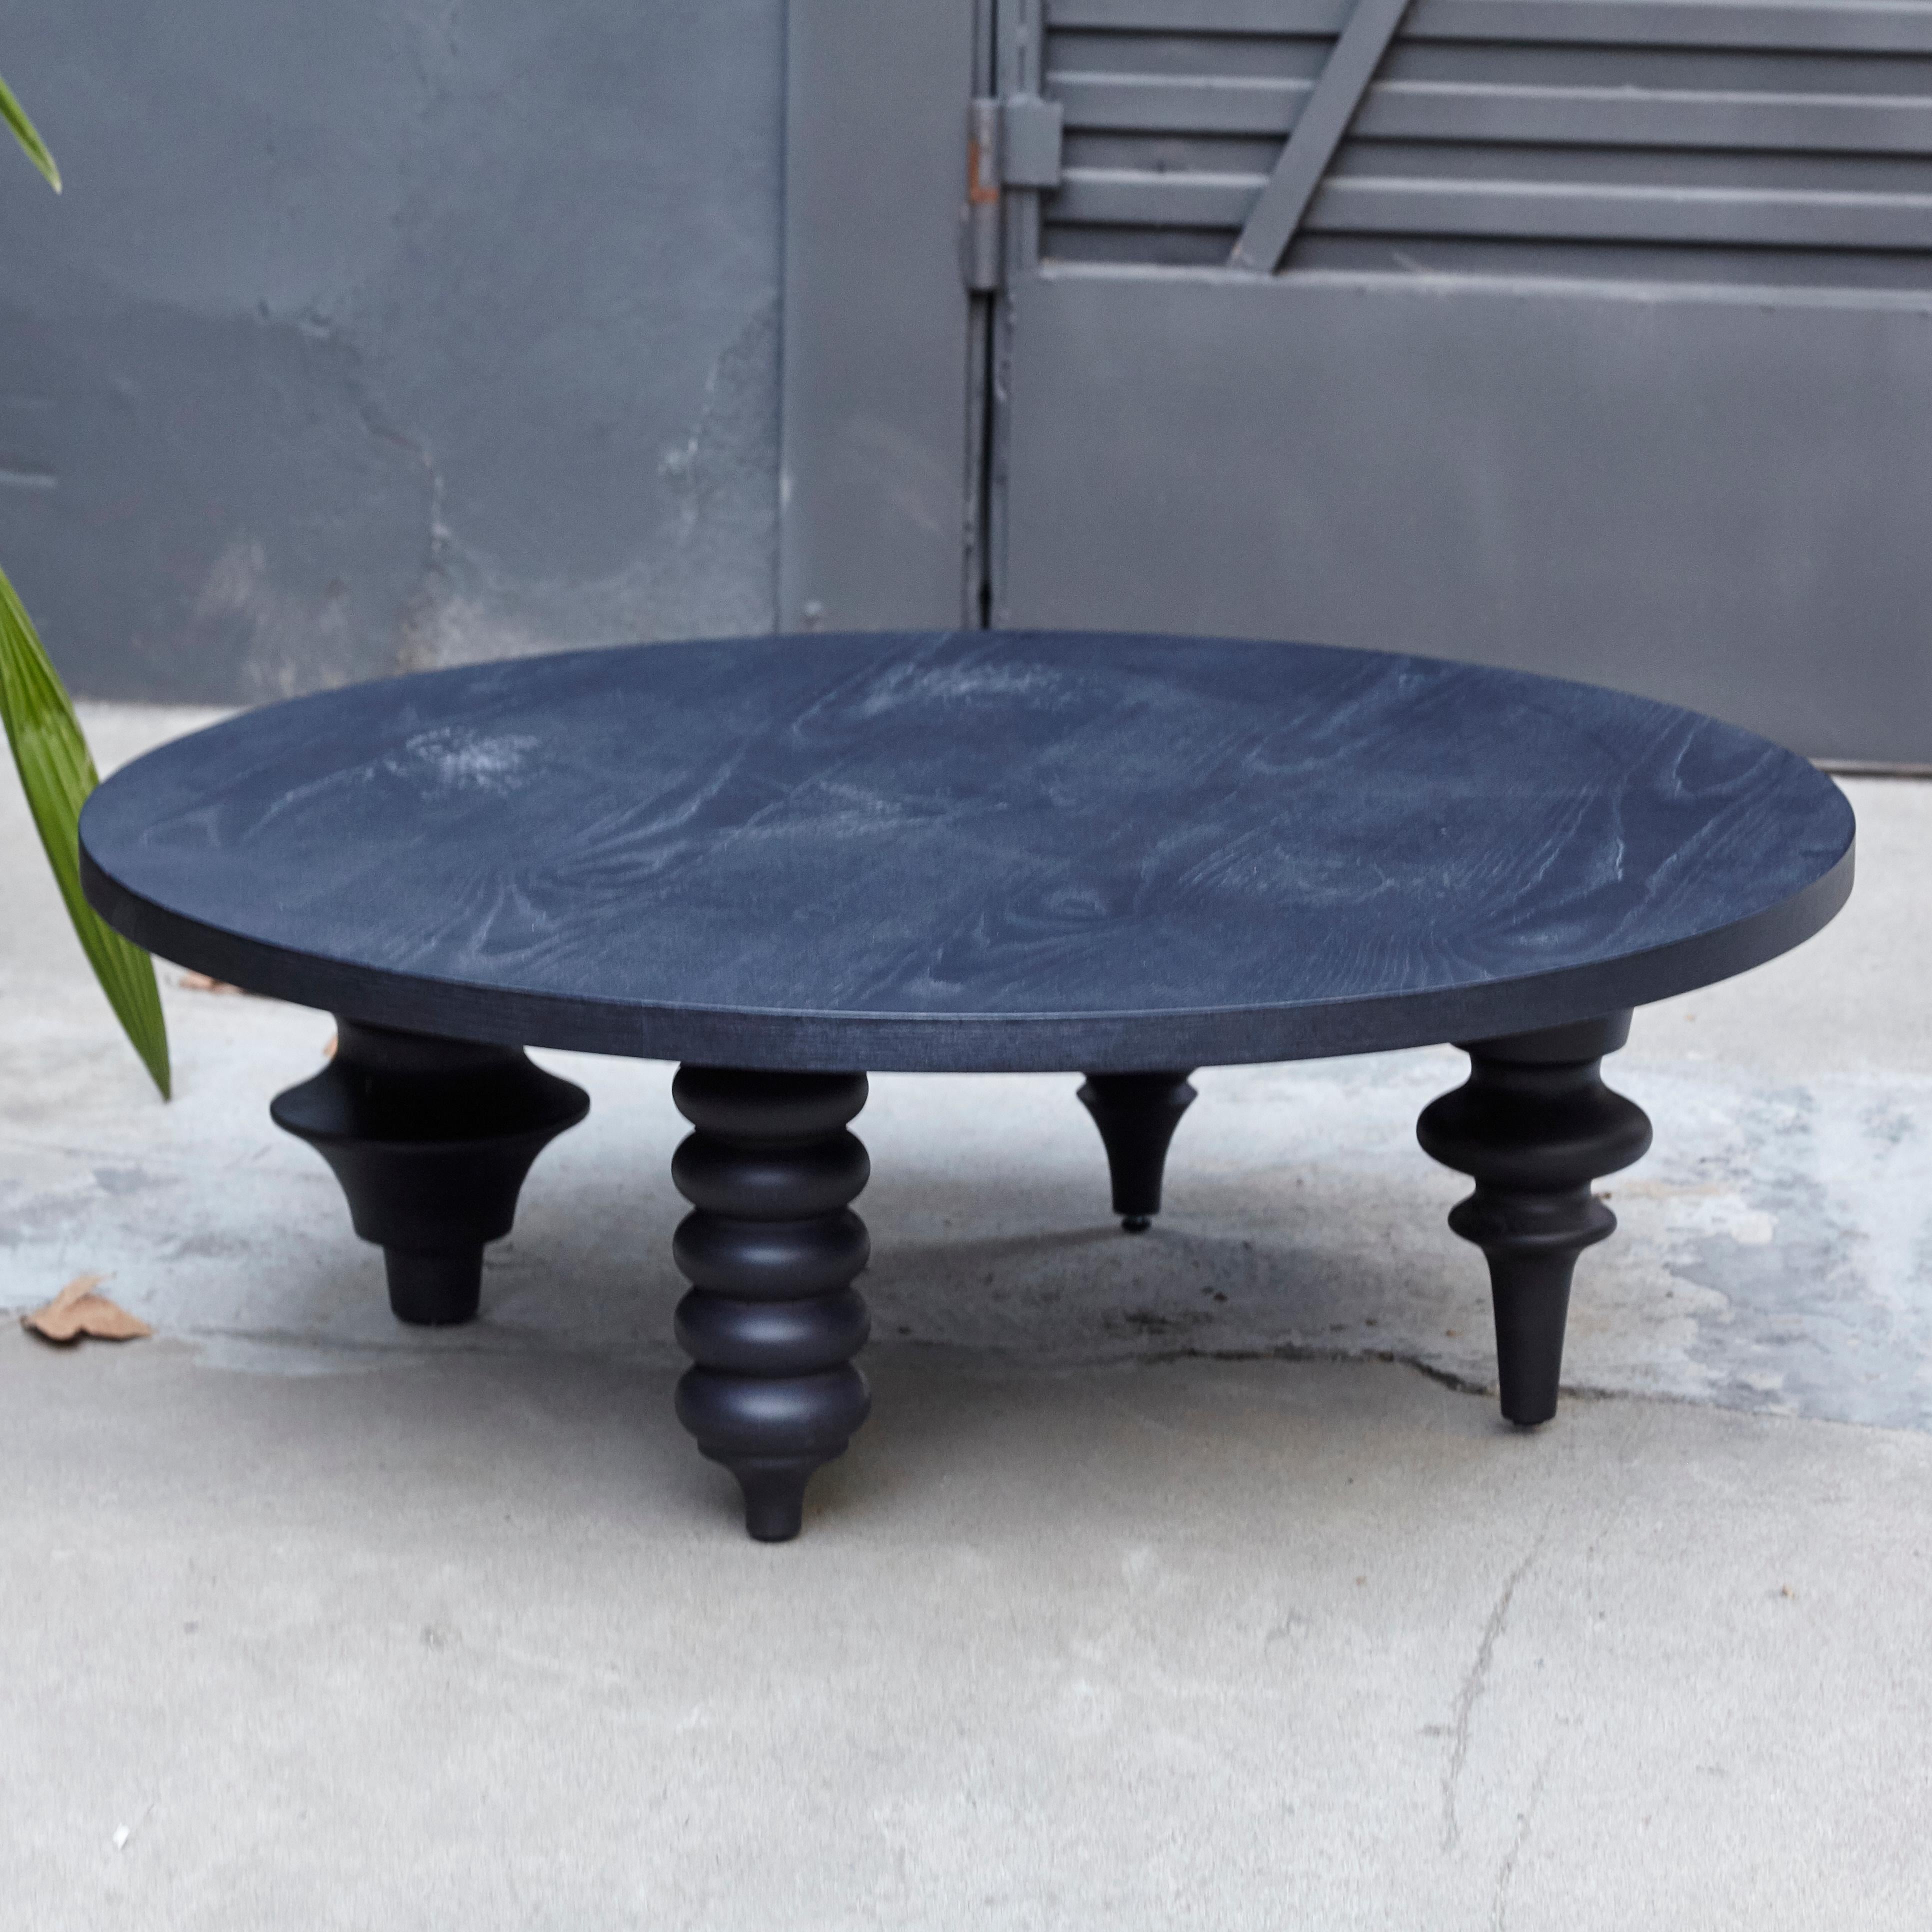 Design by Jaime Hayon, 2016
Manufactured by BD Barcelona.

Low table with rectangular black ash tree top. The Top and legs have matte finishes.
Has some wear consistent of age and use.

Measures: 100Ø x H.35 cm.